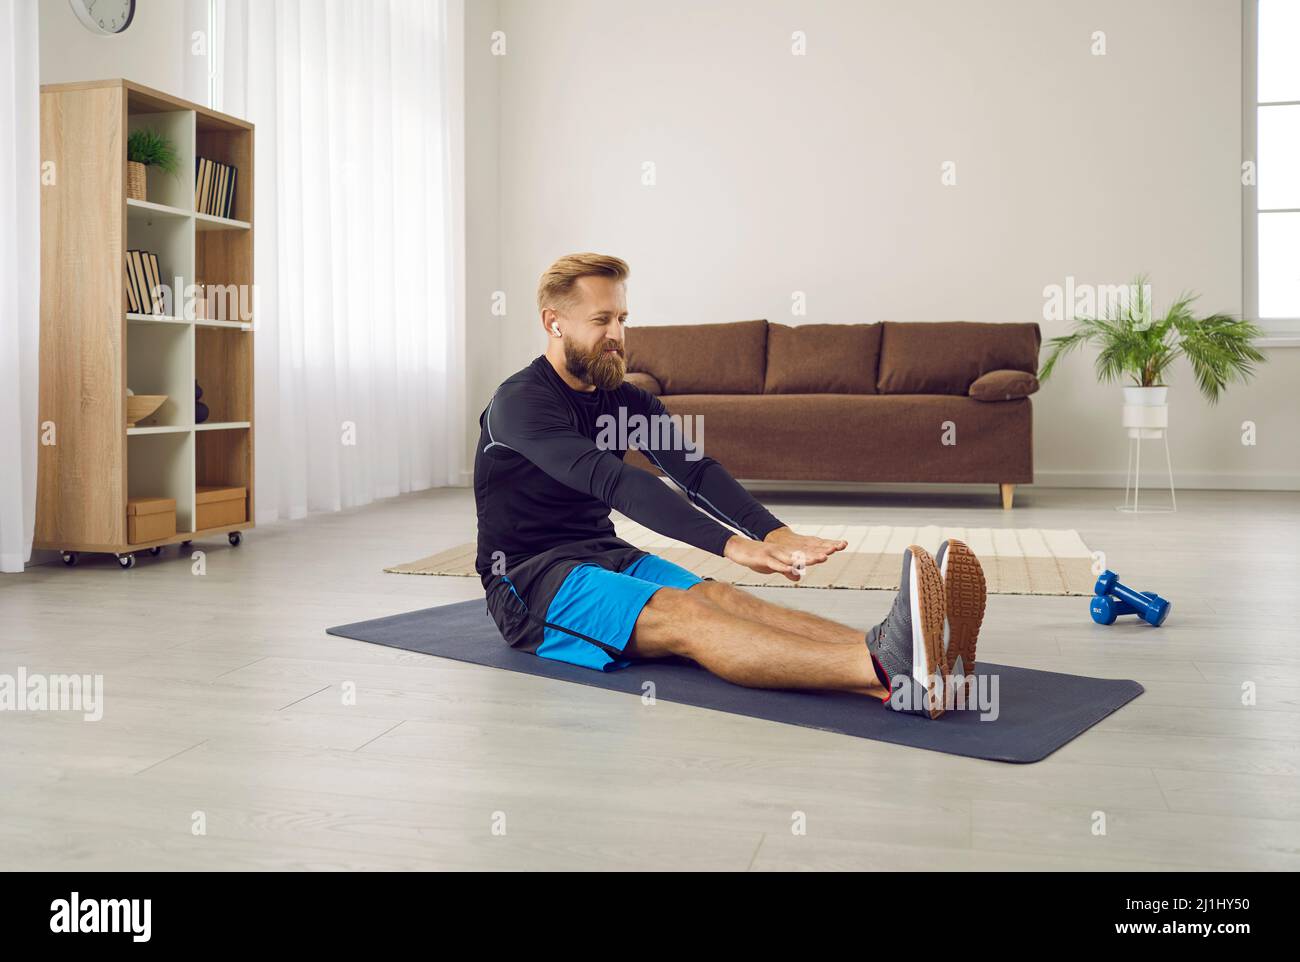 Athletic man at home doing sports stretching stretching his arms to tips of his legs. Stock Photo